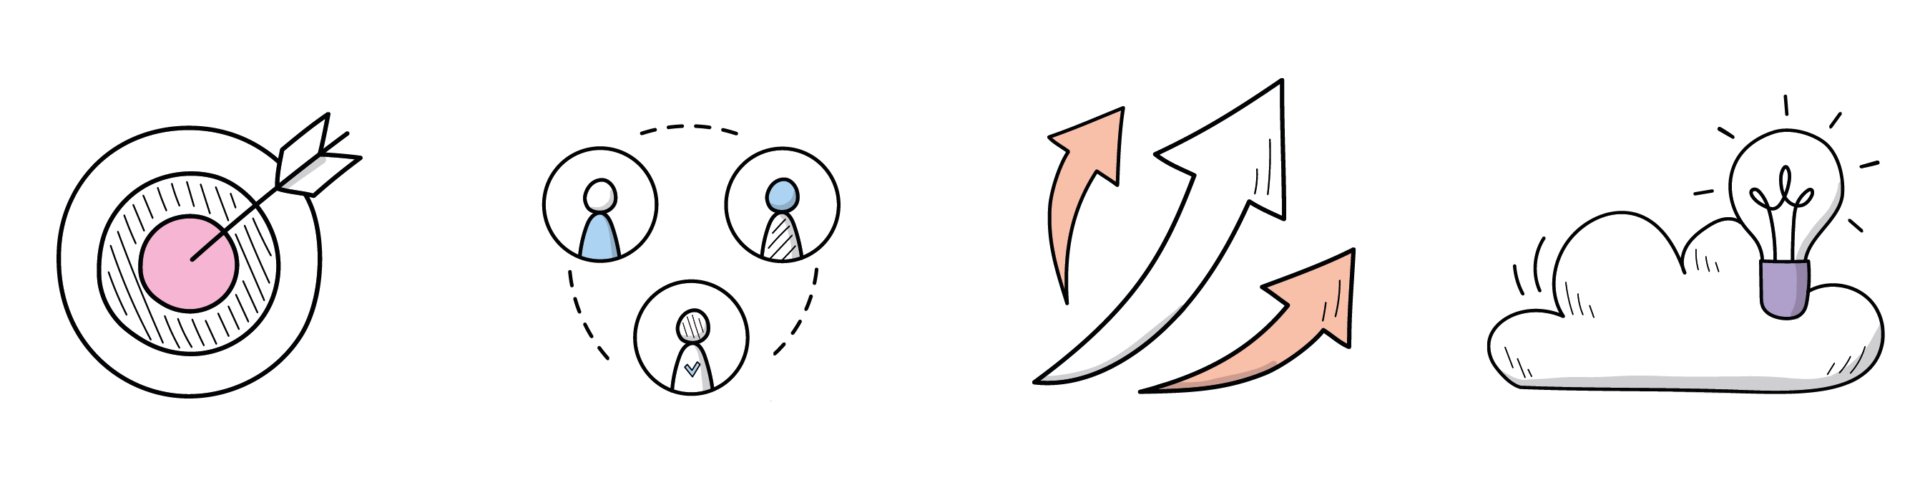 Barnwood Value logos. Left to right. Focused value represented by arrow in dart board, Inclusive value represented by 3 figures forming a circle, Bold value represented by 3 arrows pointed upwards and Forward Thinking value represented by light bulb on top of a cloud.